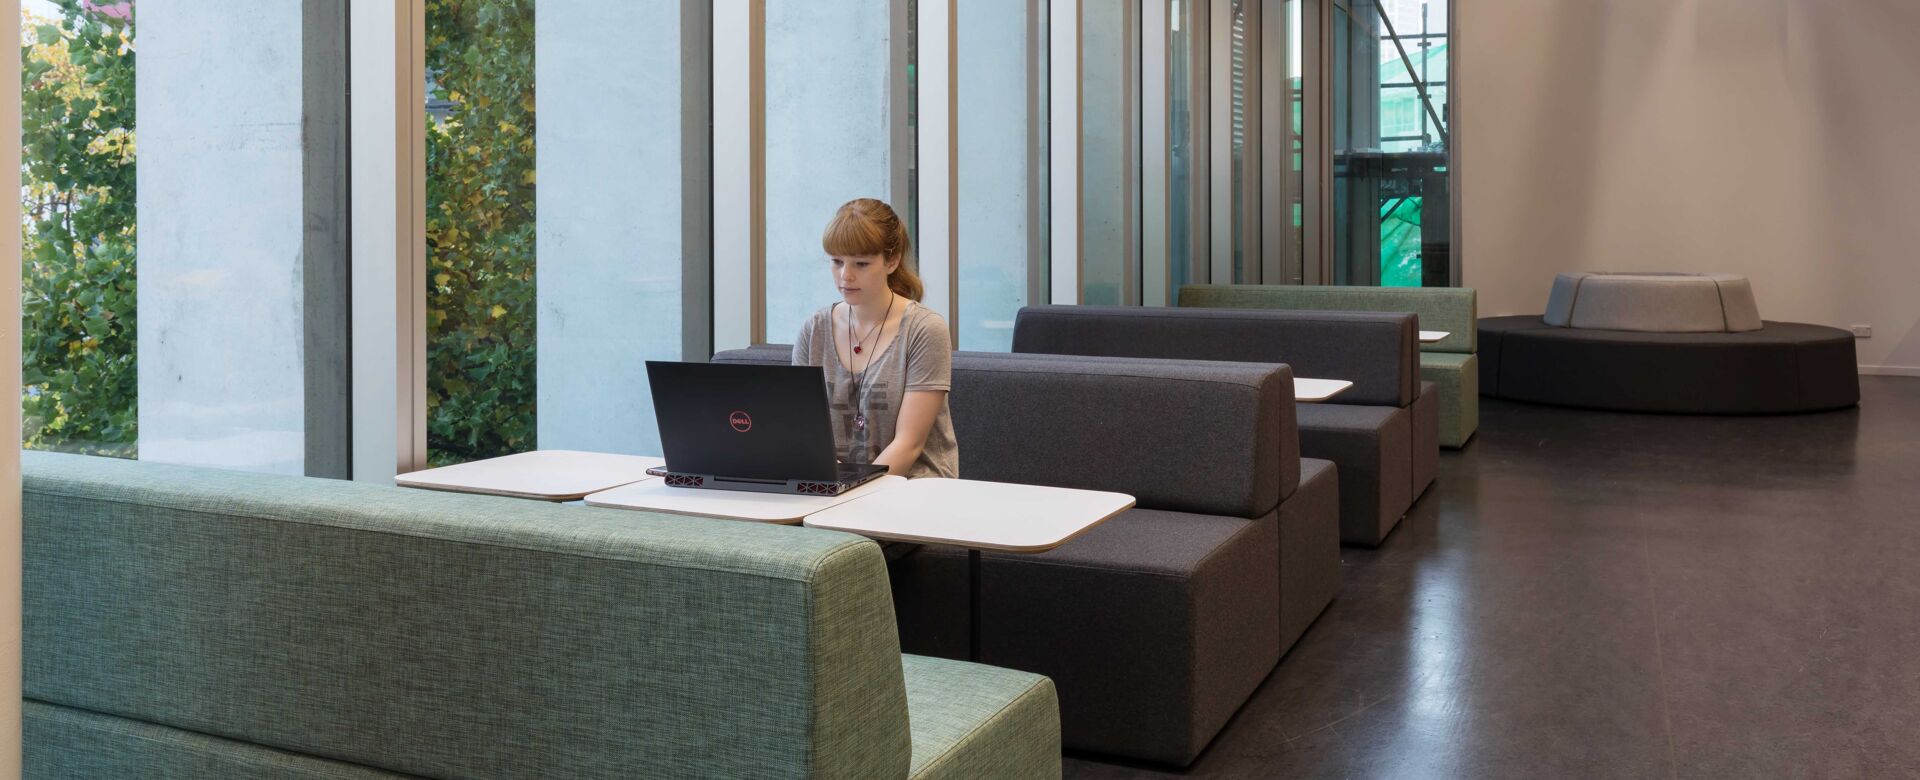 Auckland University of Technology Learning Space furniture 